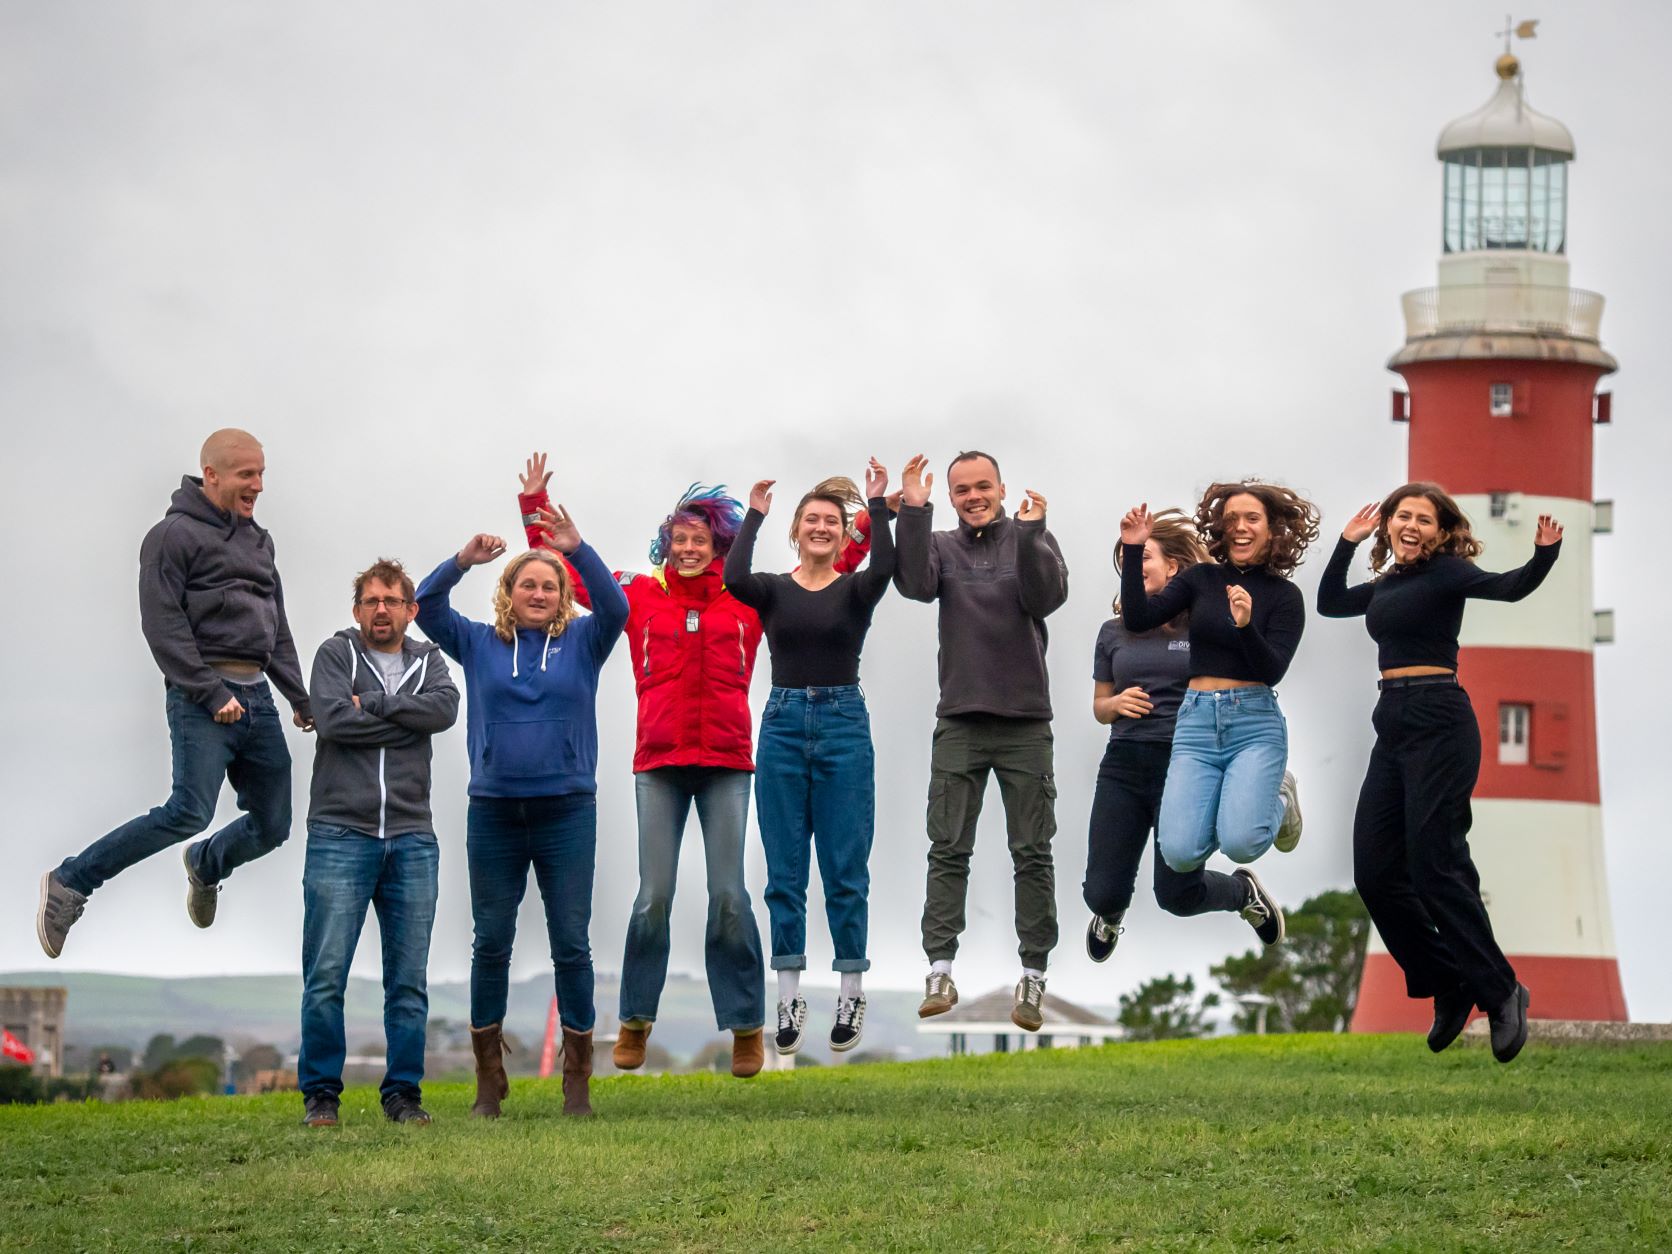 A group of scientists jump for joy in front of Smeaton's lighthouse, Plymouth